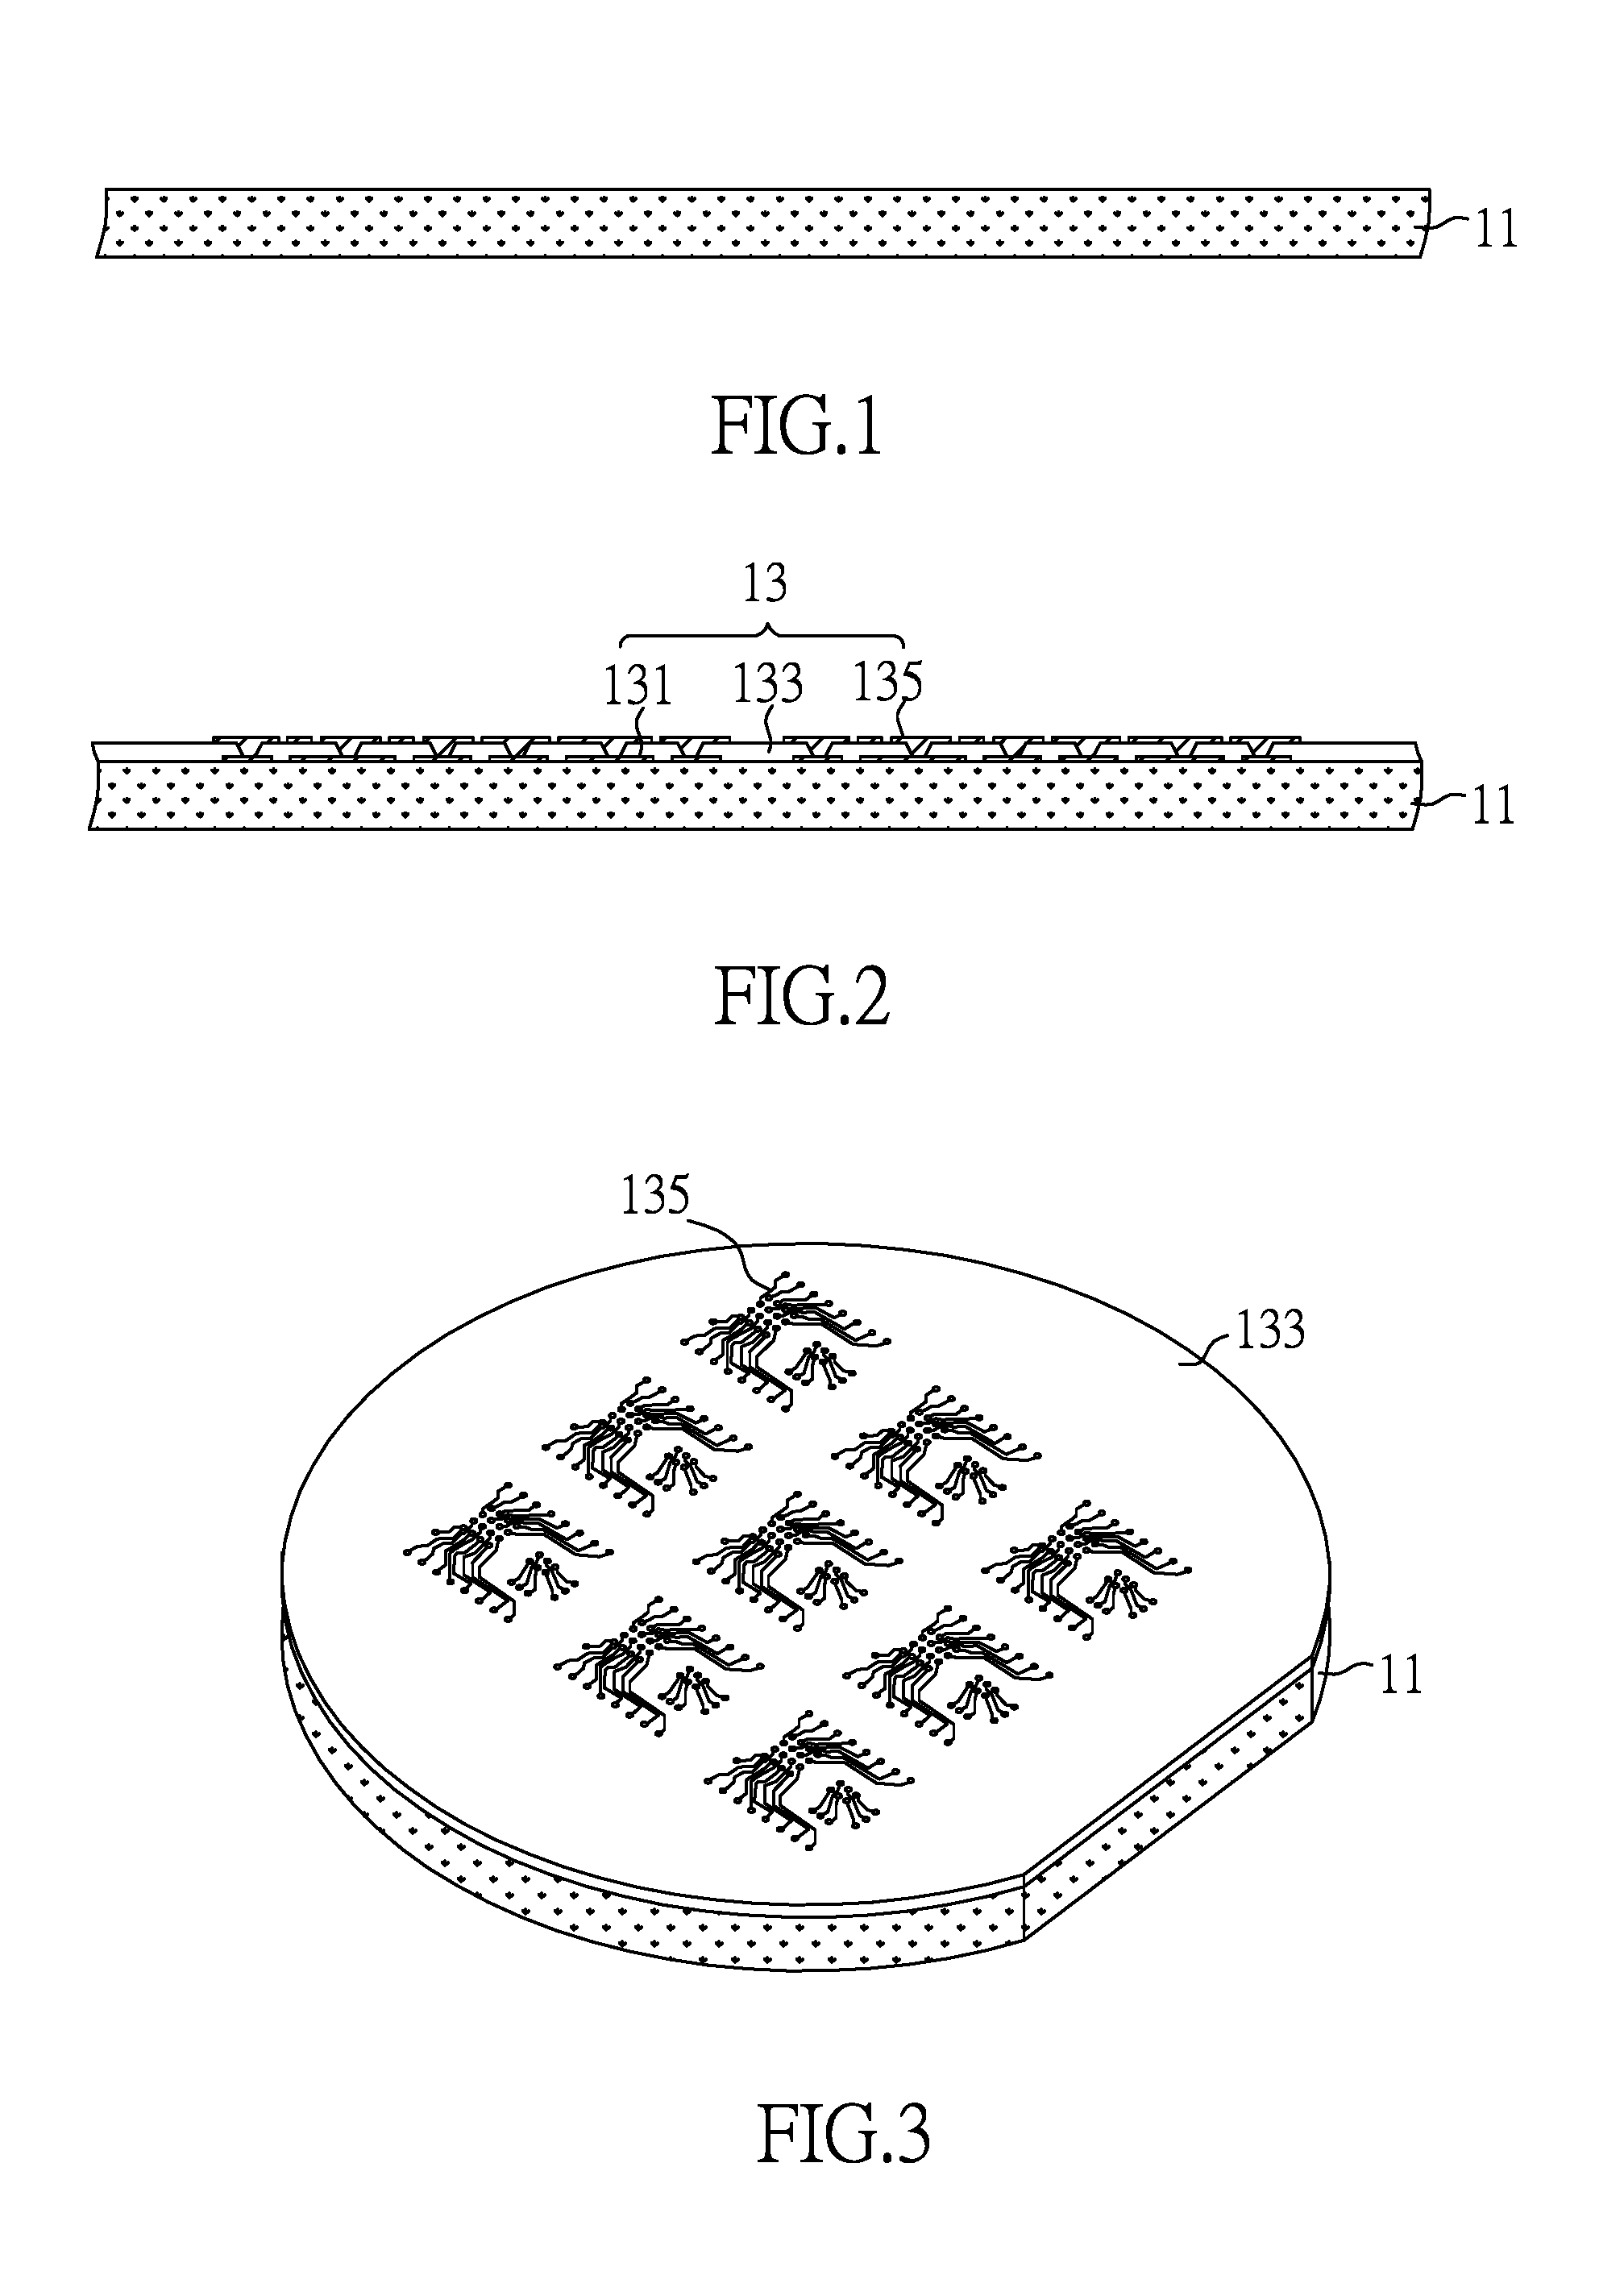 Face-to-face semiconductor assembly having semiconductor device in dielectric recess